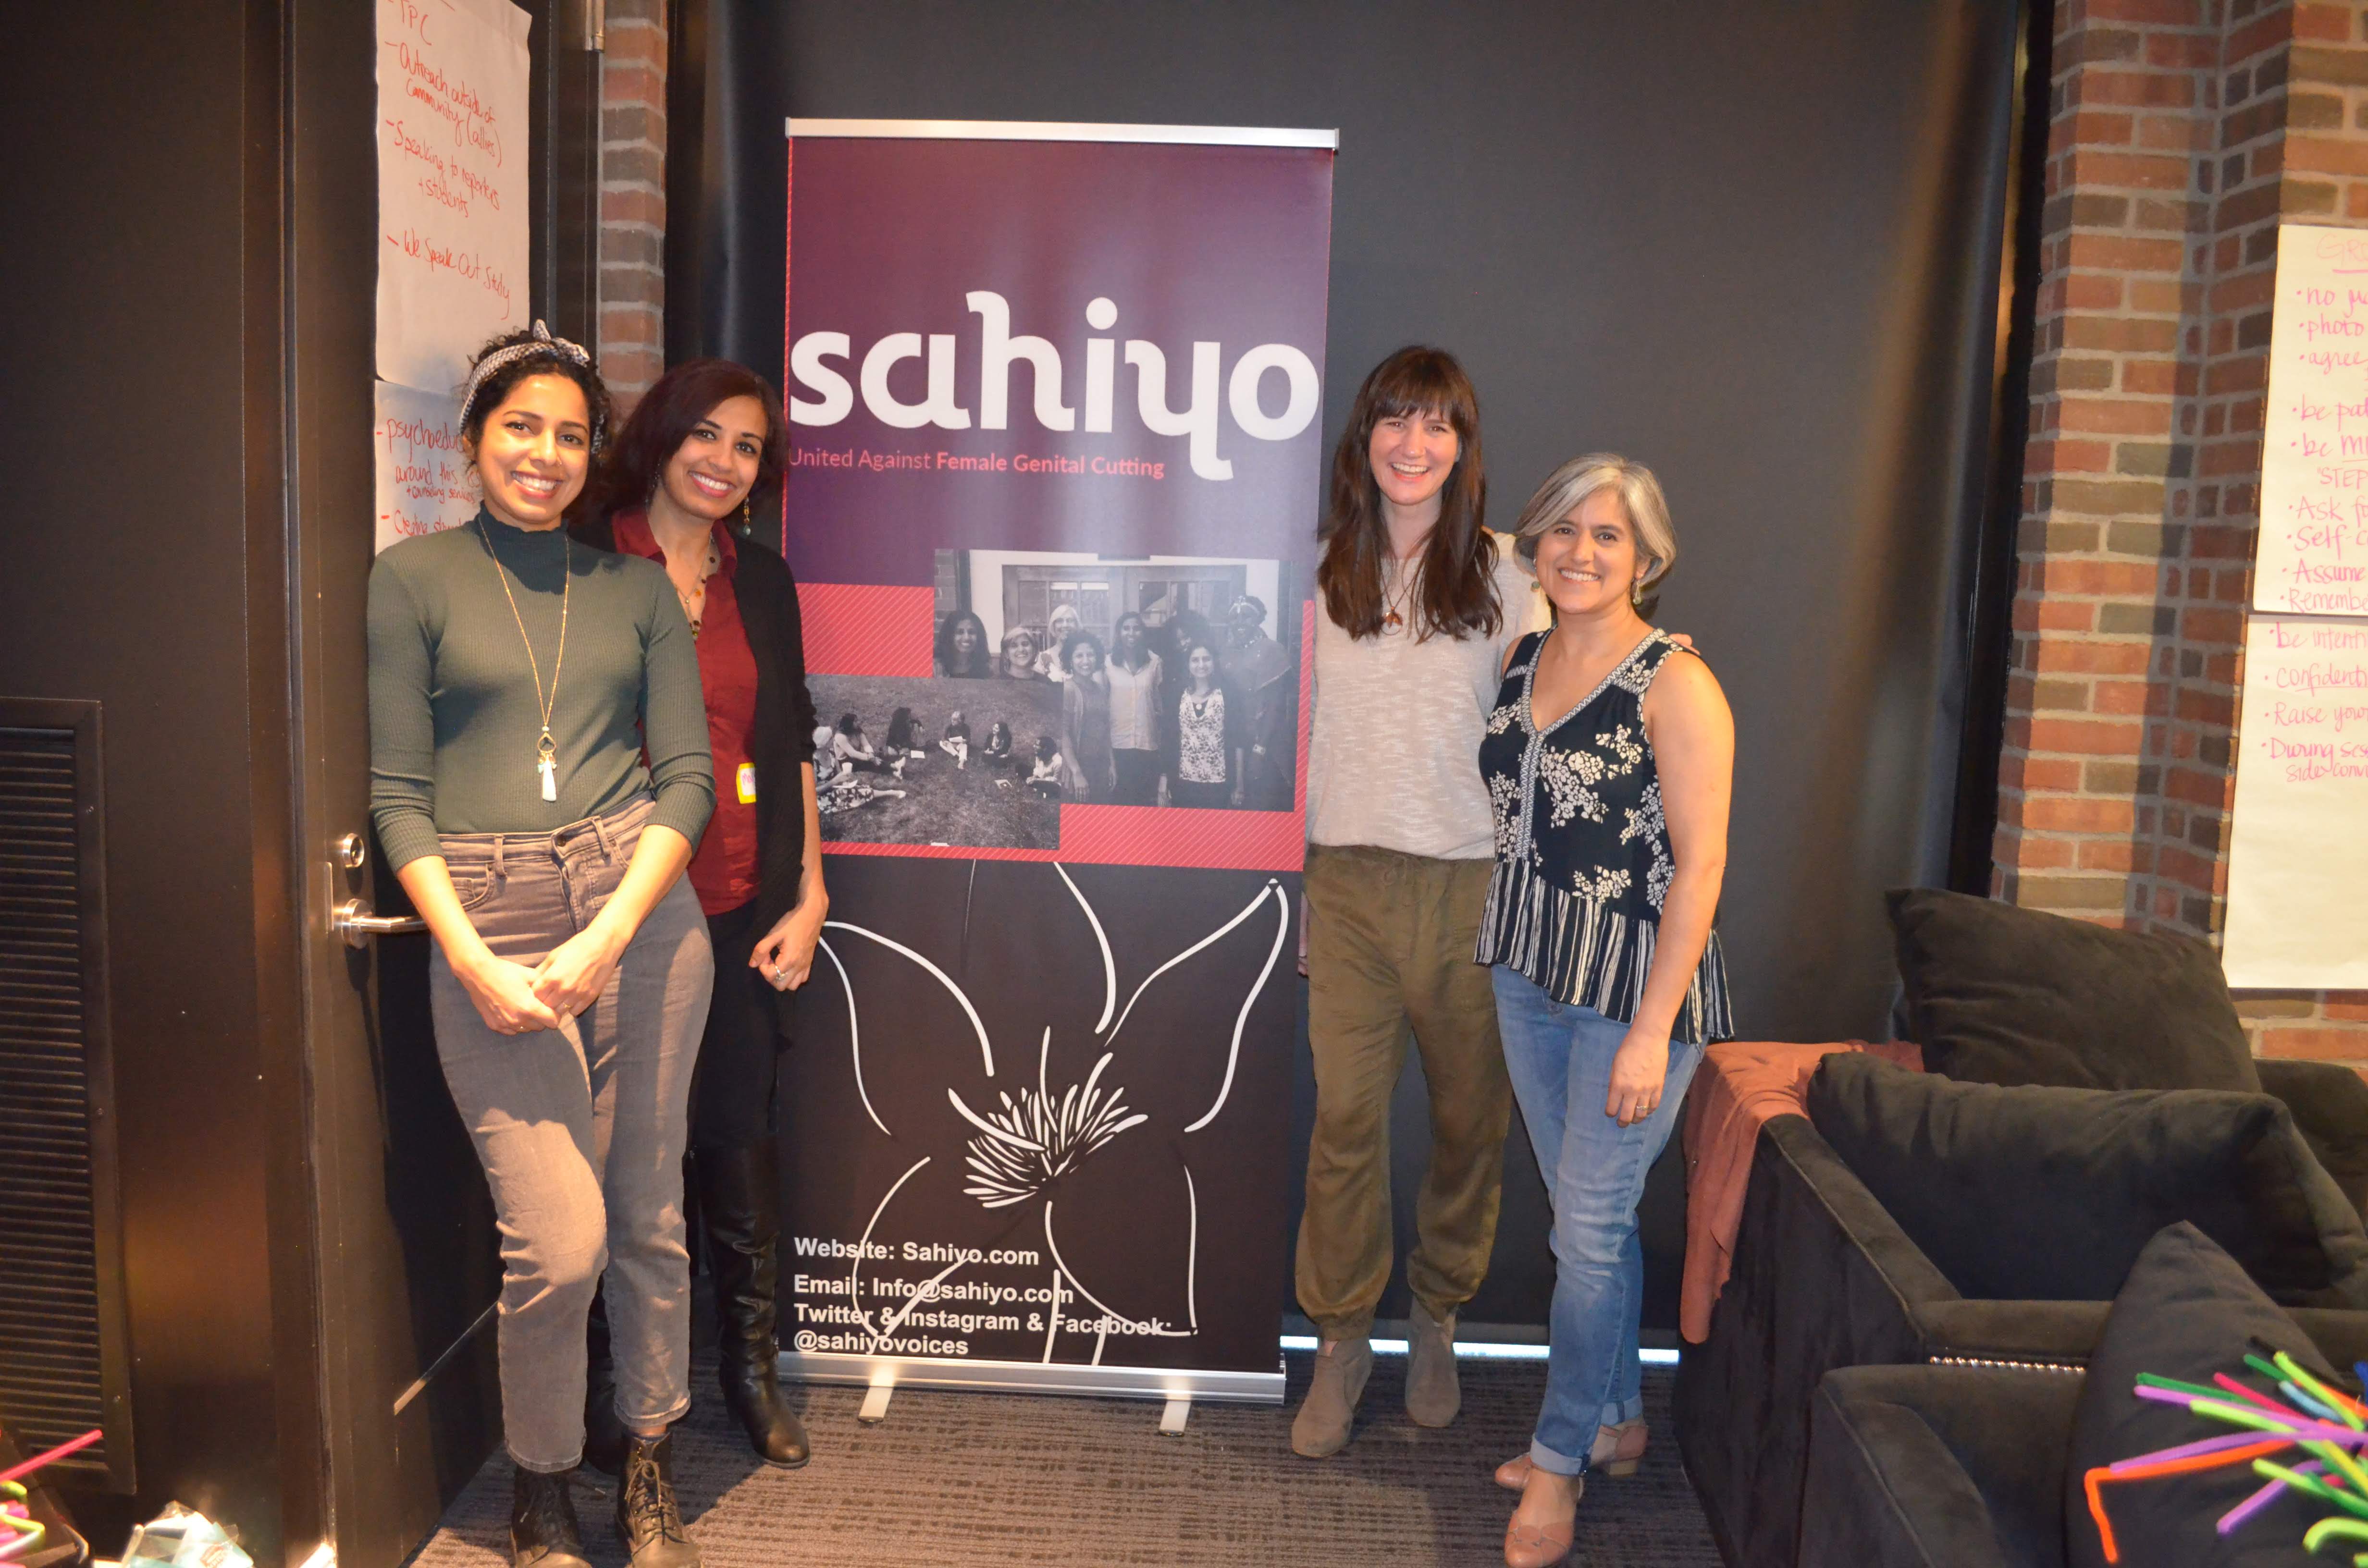 Why I care about khatna: Reflections from the 2019 Sahiyo Activist Retreat